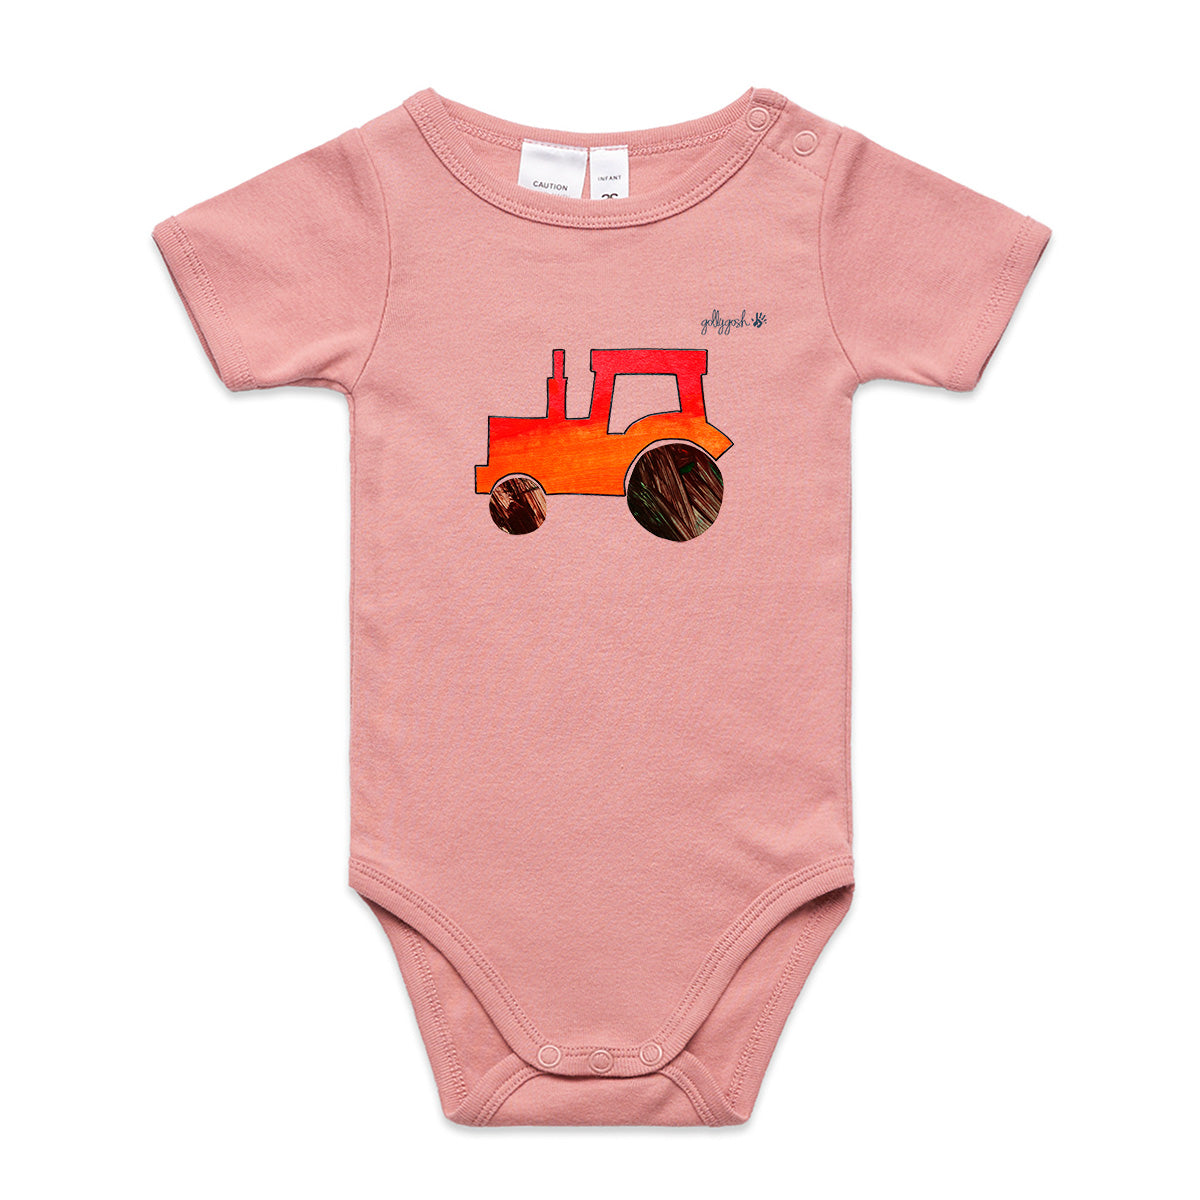 Tractor - Infant Baby Grow